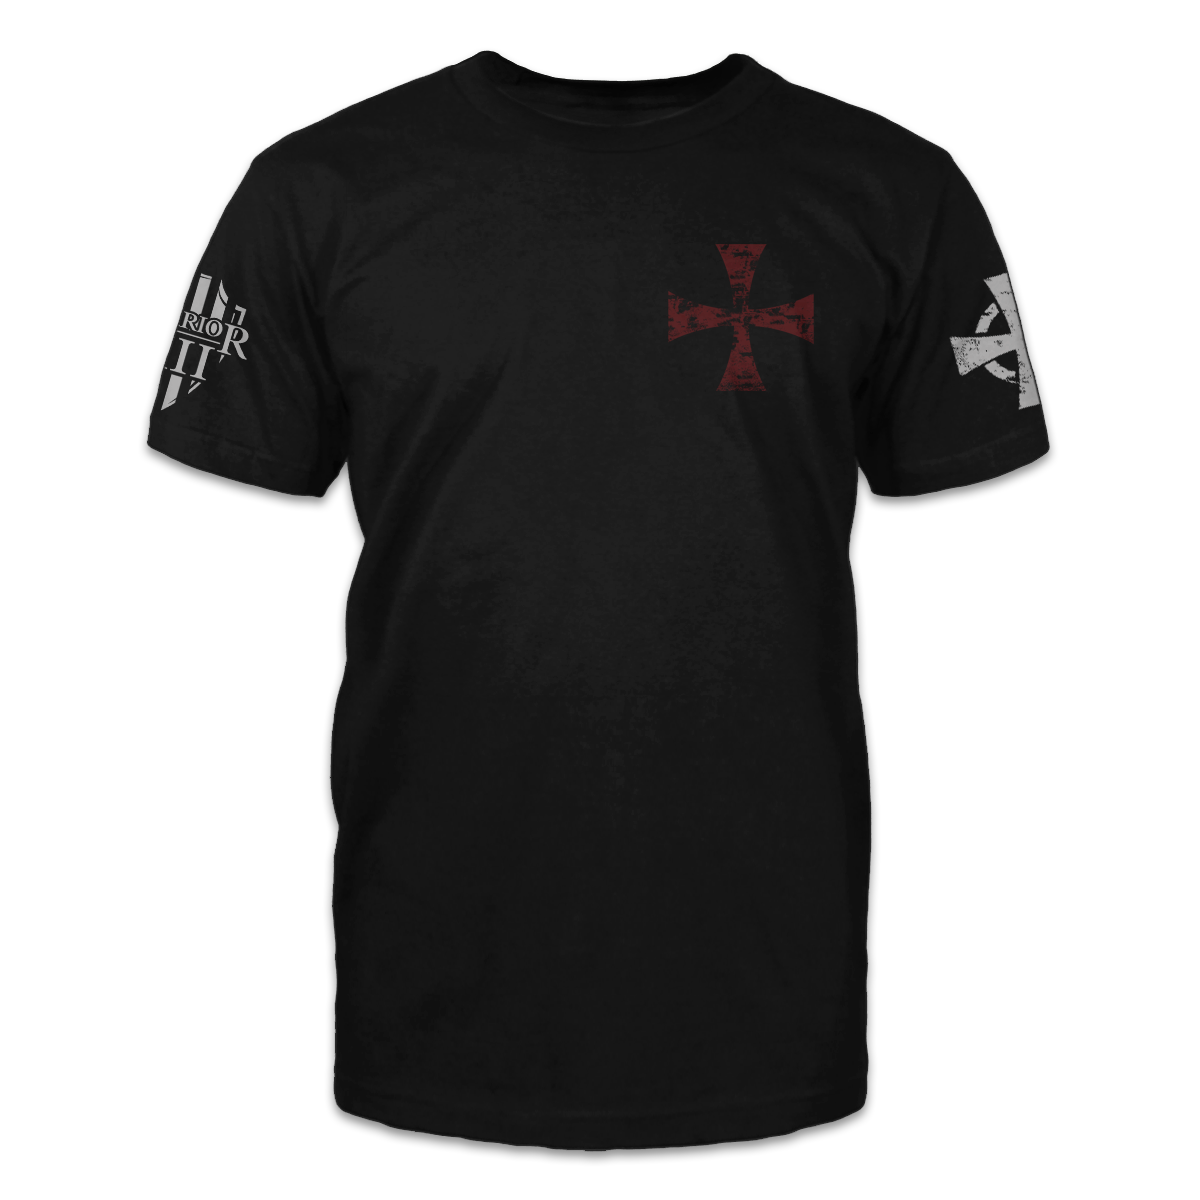 A black Be Without Fear t-shirt with the knoghts templar cross printed on the front of the shirt.